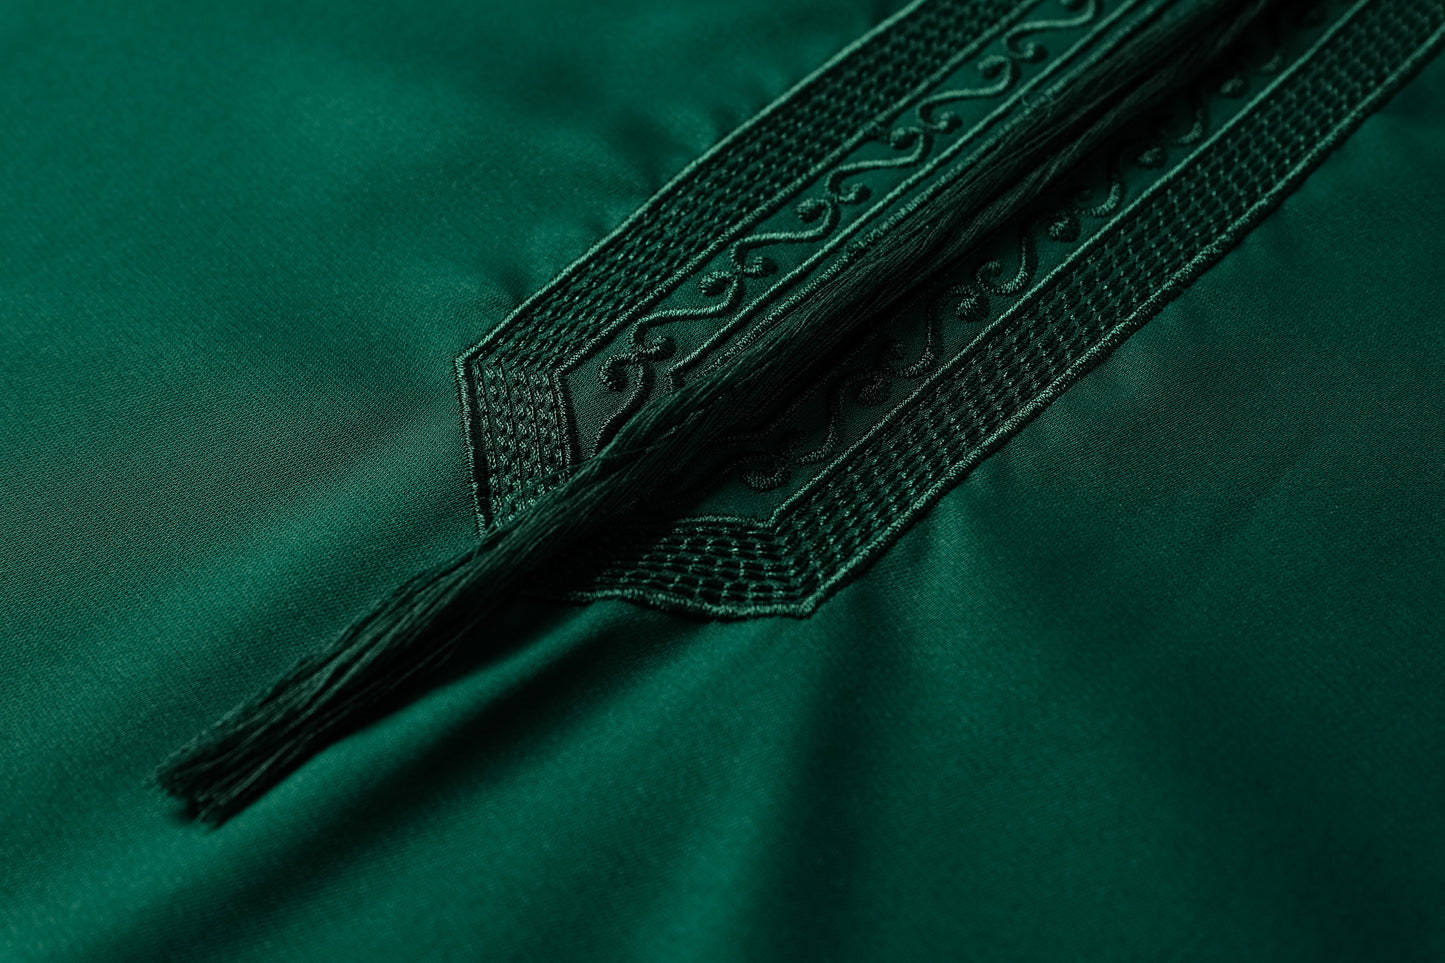 Qamis - Emirati Green with tie embroidery